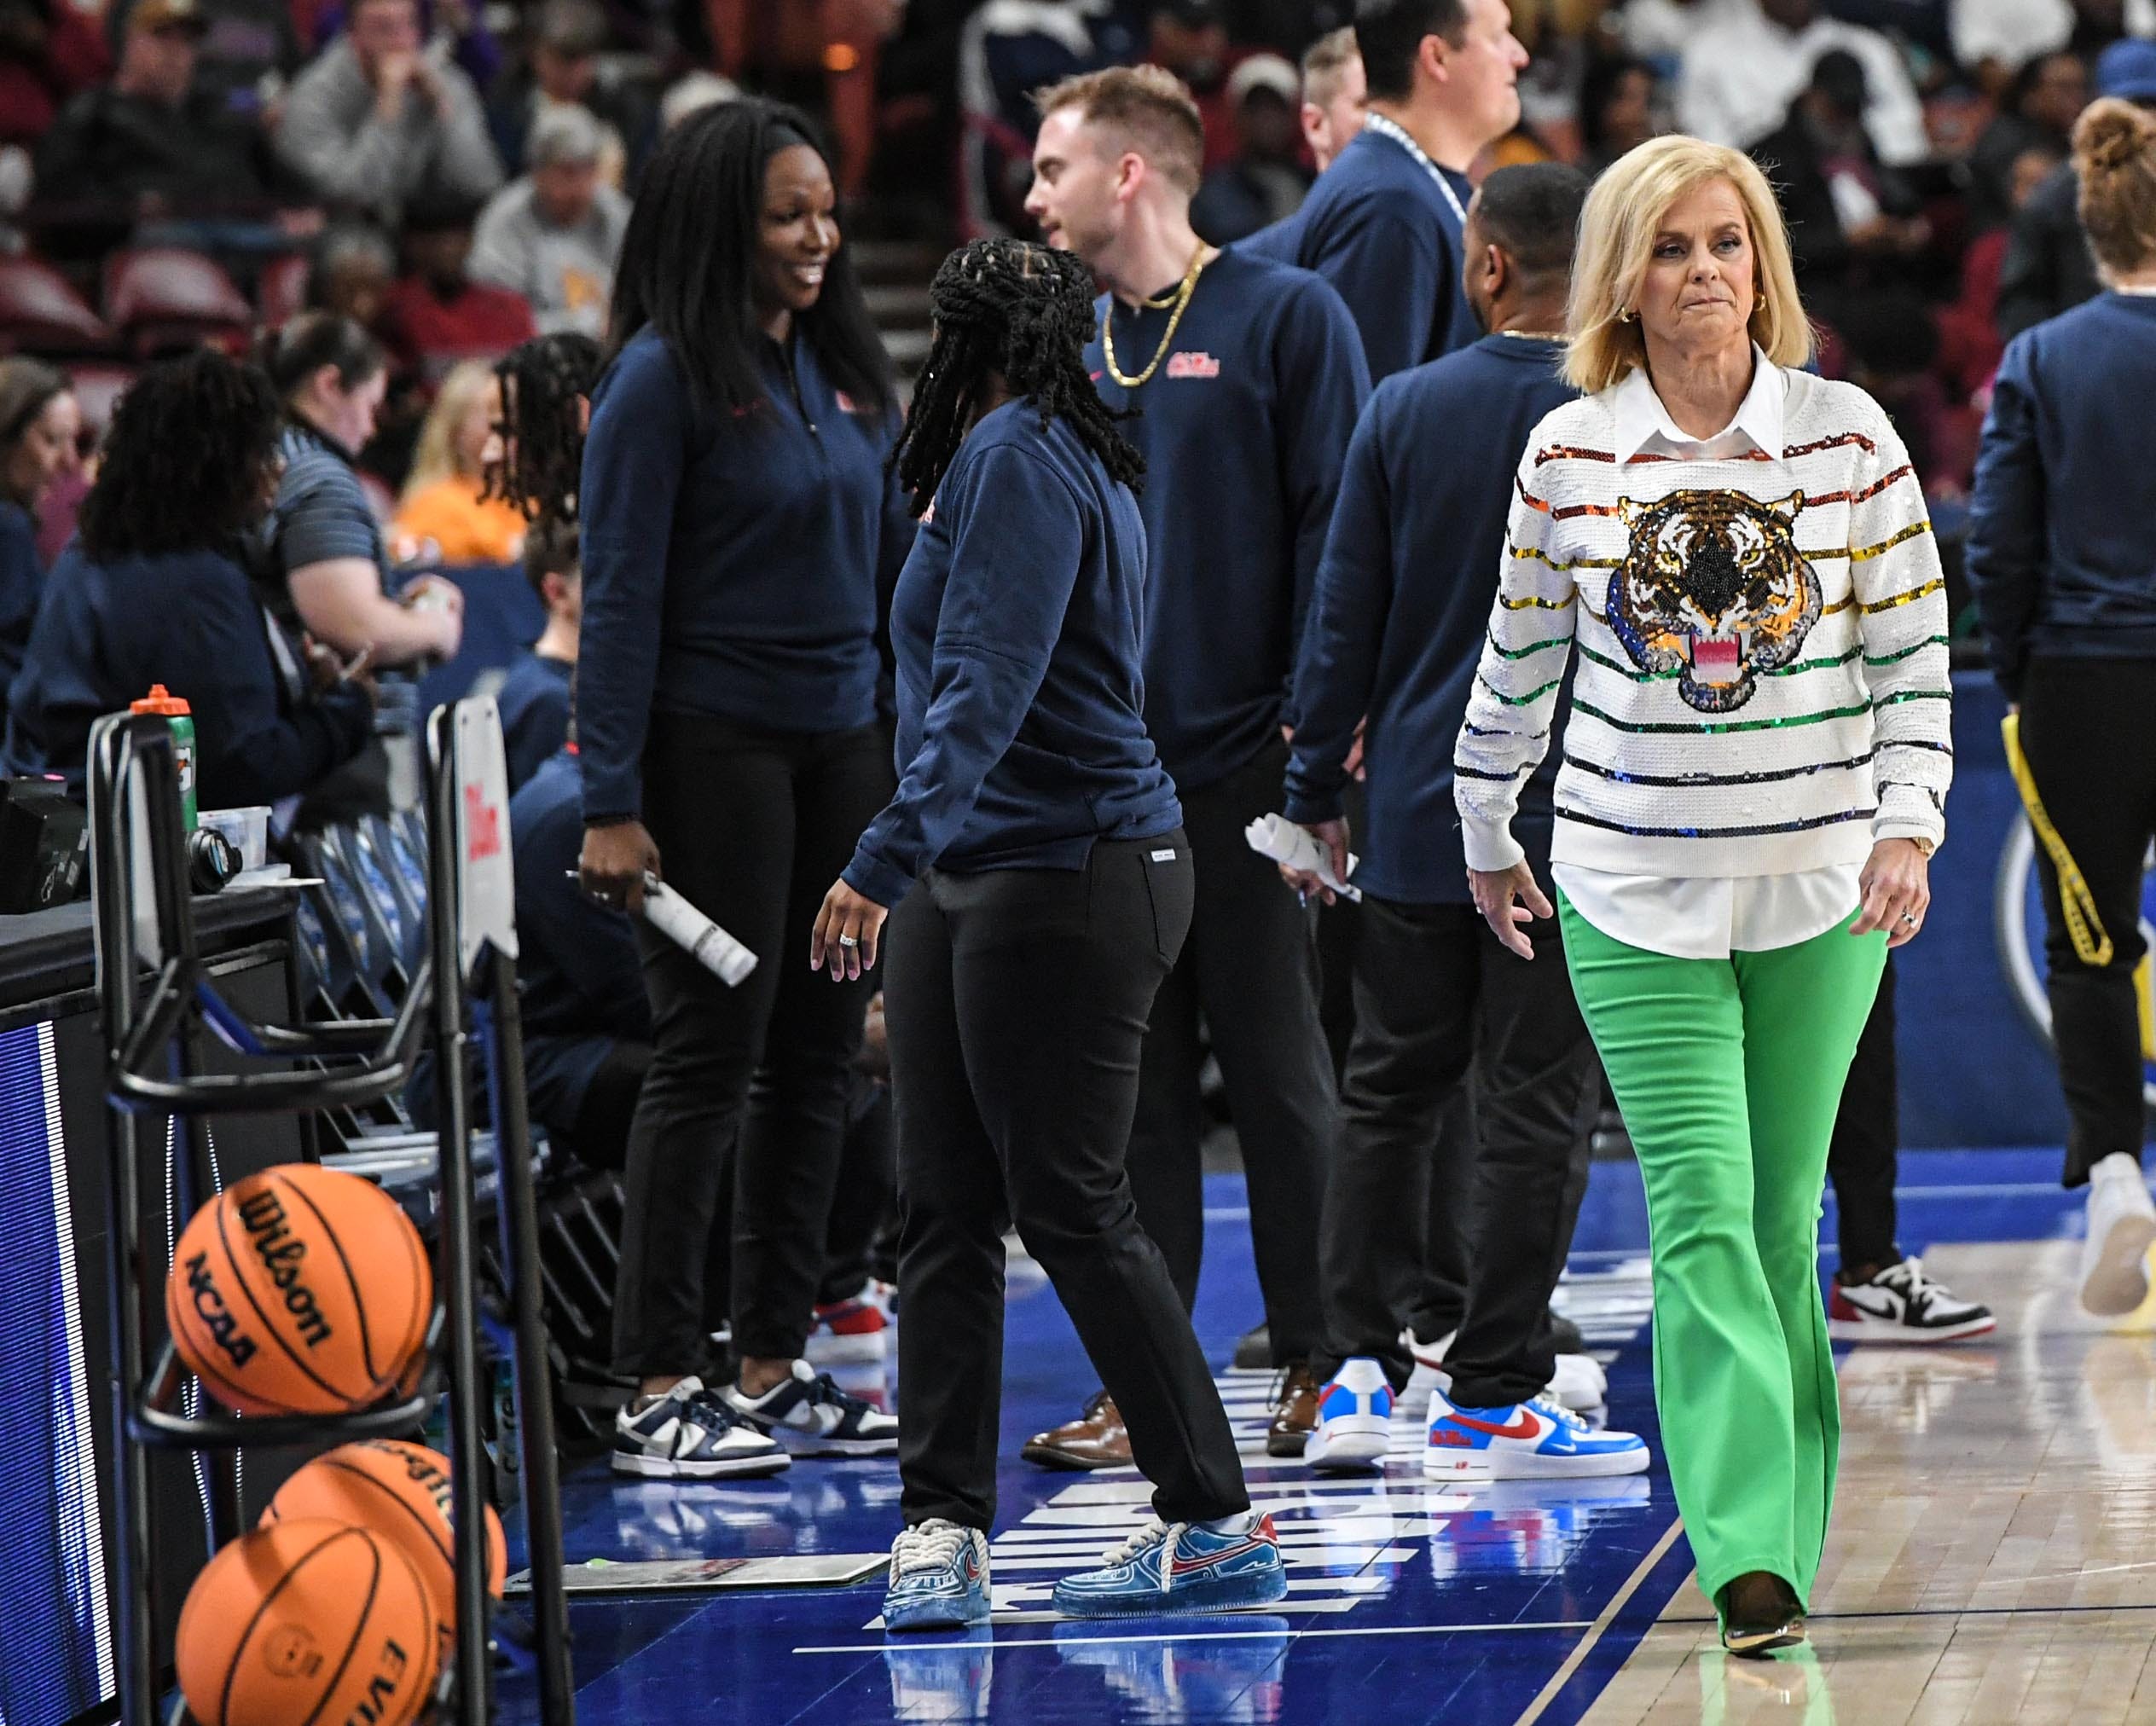 Louisiana State University Coach Kim Mulkey walks on the court before the game with Ole Miss in the SEC Women's Basketball Tournament game at the Bon Secours Wellness Arena in Greenville, S.C. Saturday, March 9, 2024.